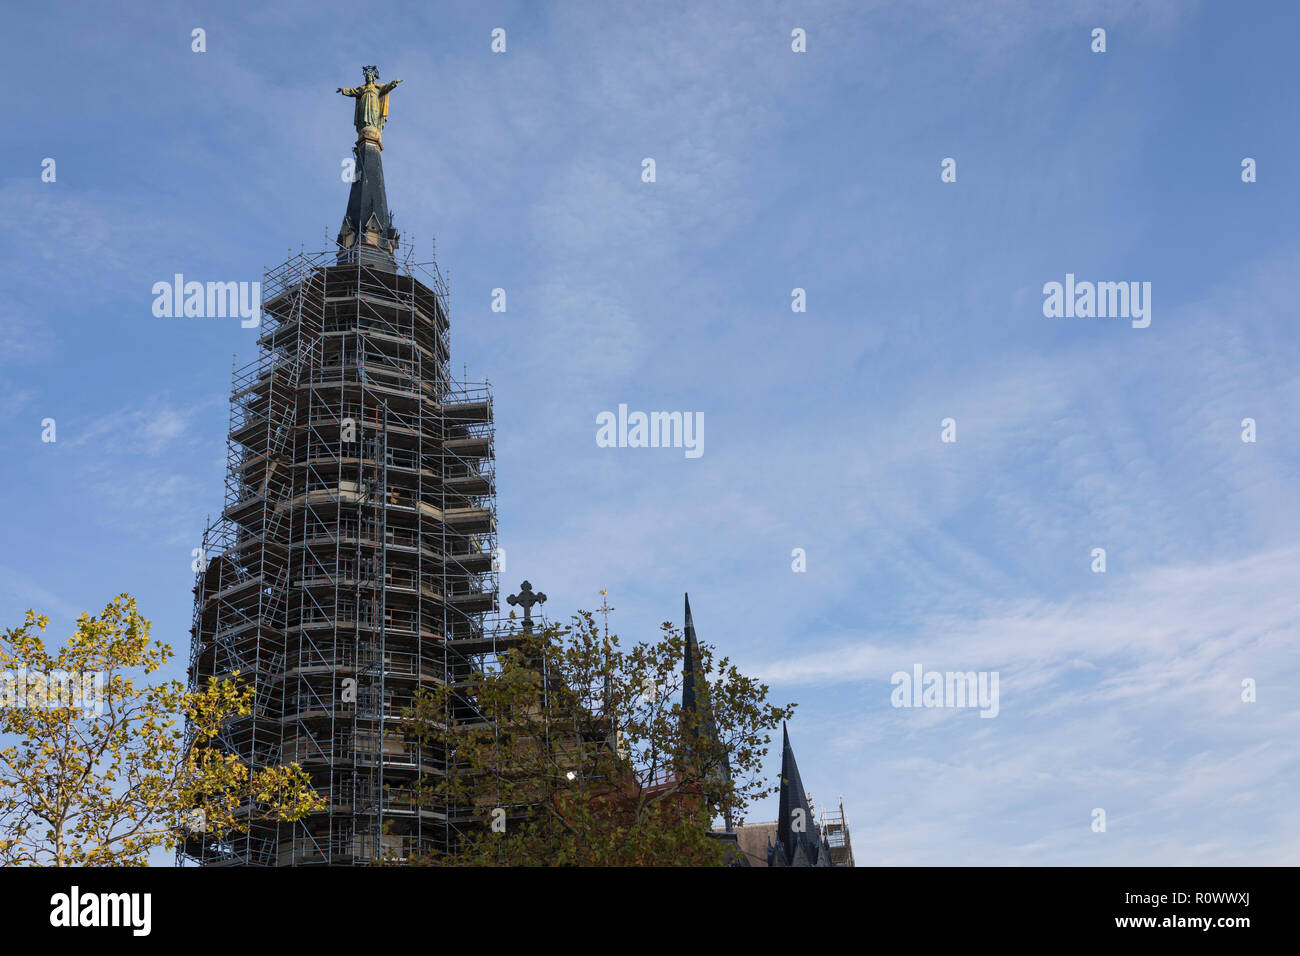 Entire church building 'Heilig Hart Kerk' in Eindhoven surrounded by scaffolding for renovation, Netherlands Stock Photo